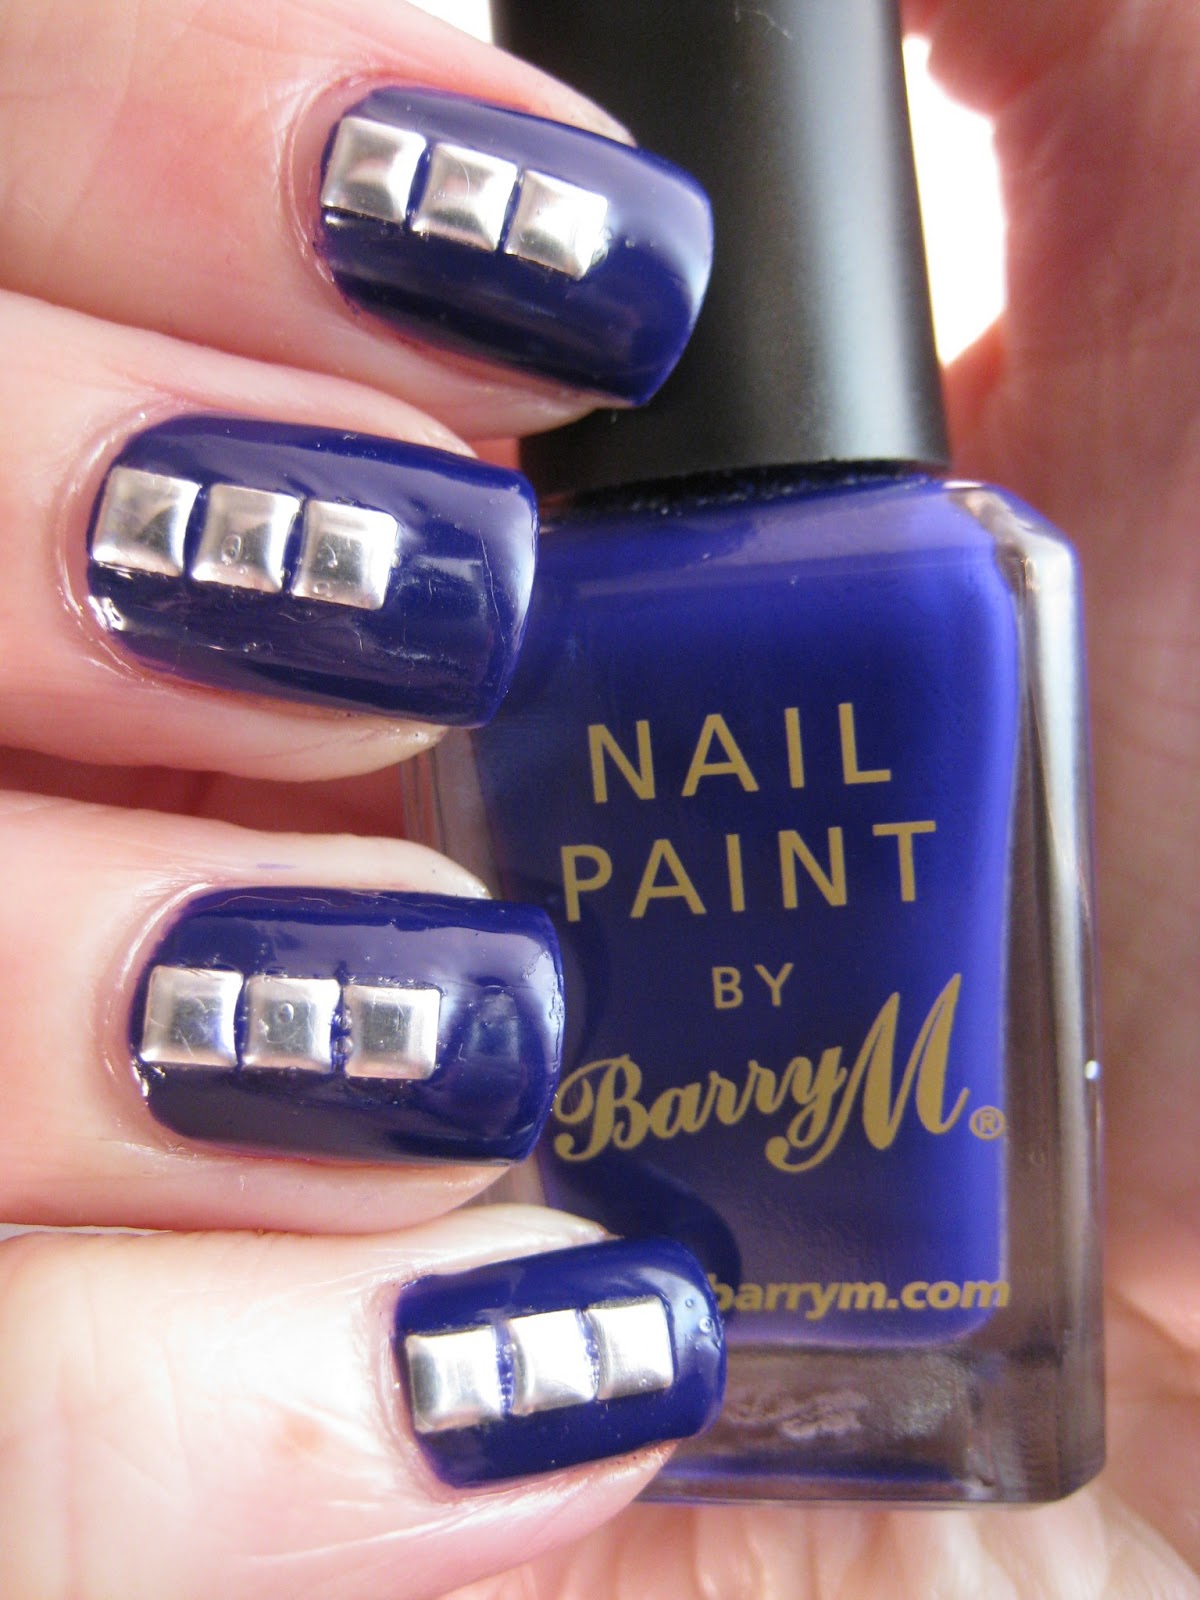 Naily perfect: Barry M Indigo with silver studs!